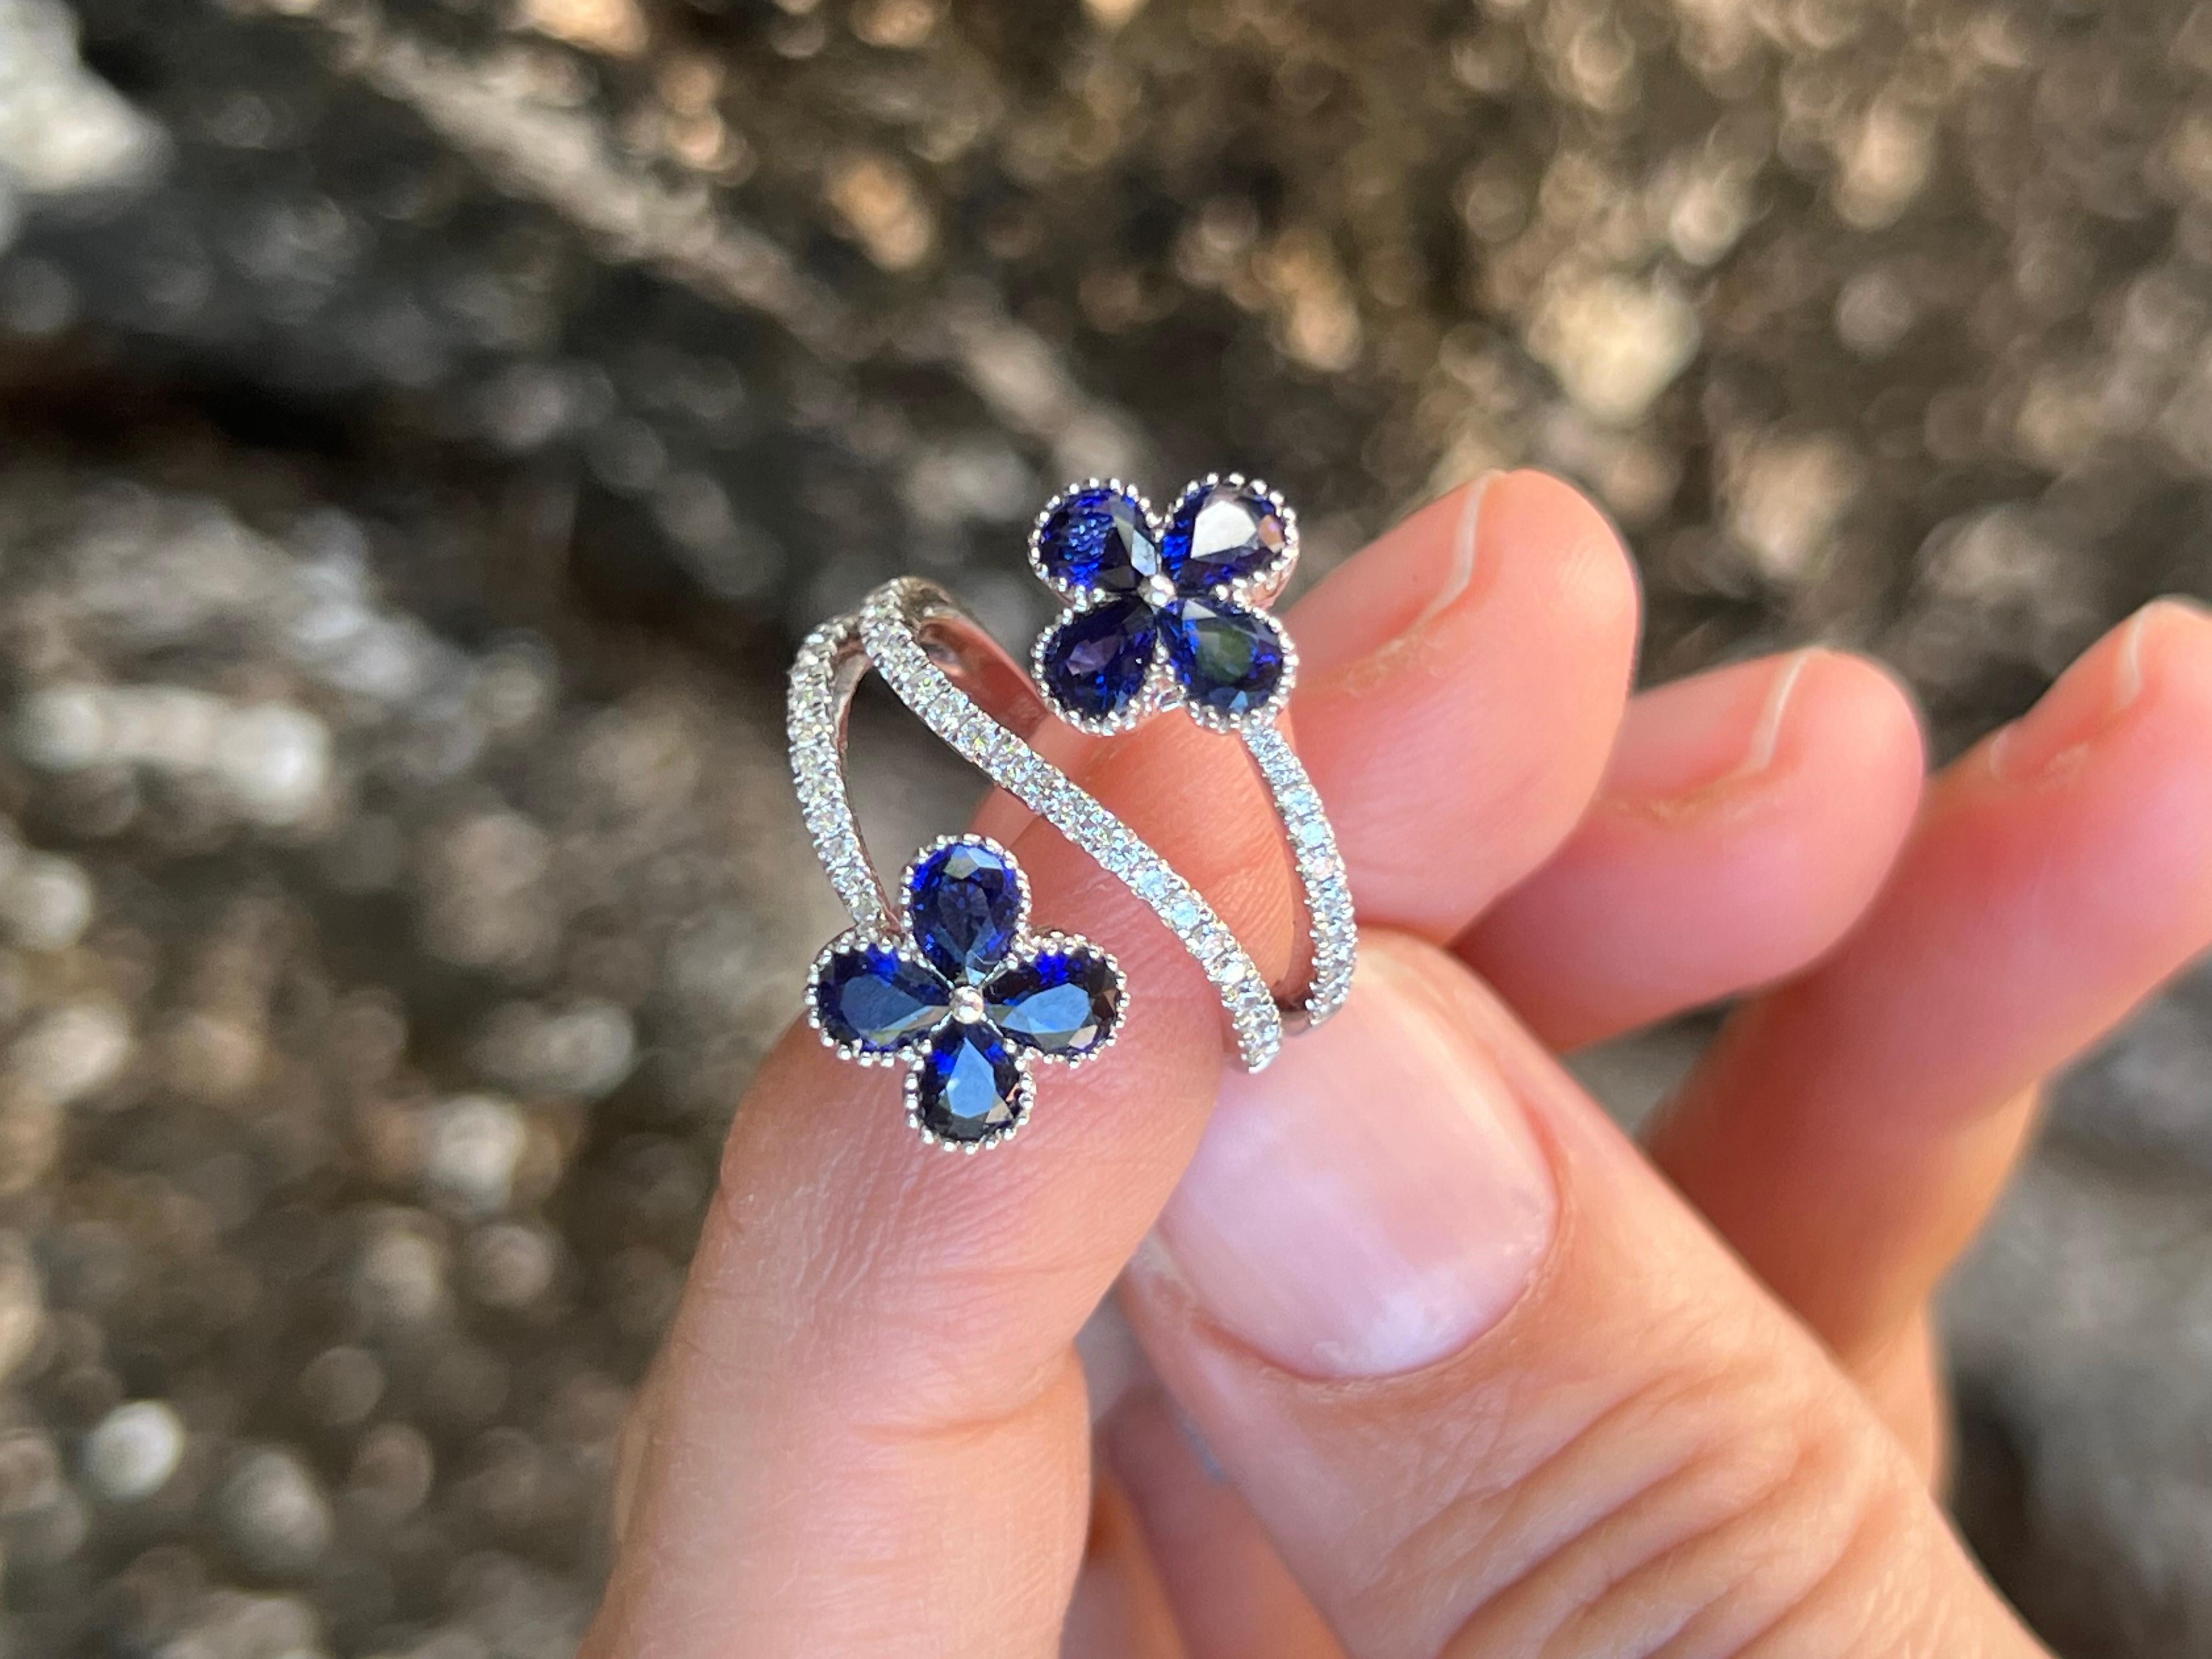 18 karat white gold with pear shaped sapphires in a clover flower shape. The diamond ring design wraps around the finger as a delicate strand around the finger 3 times, ending in the clovers.

Features
18K white gold
2.14 carat total weight in